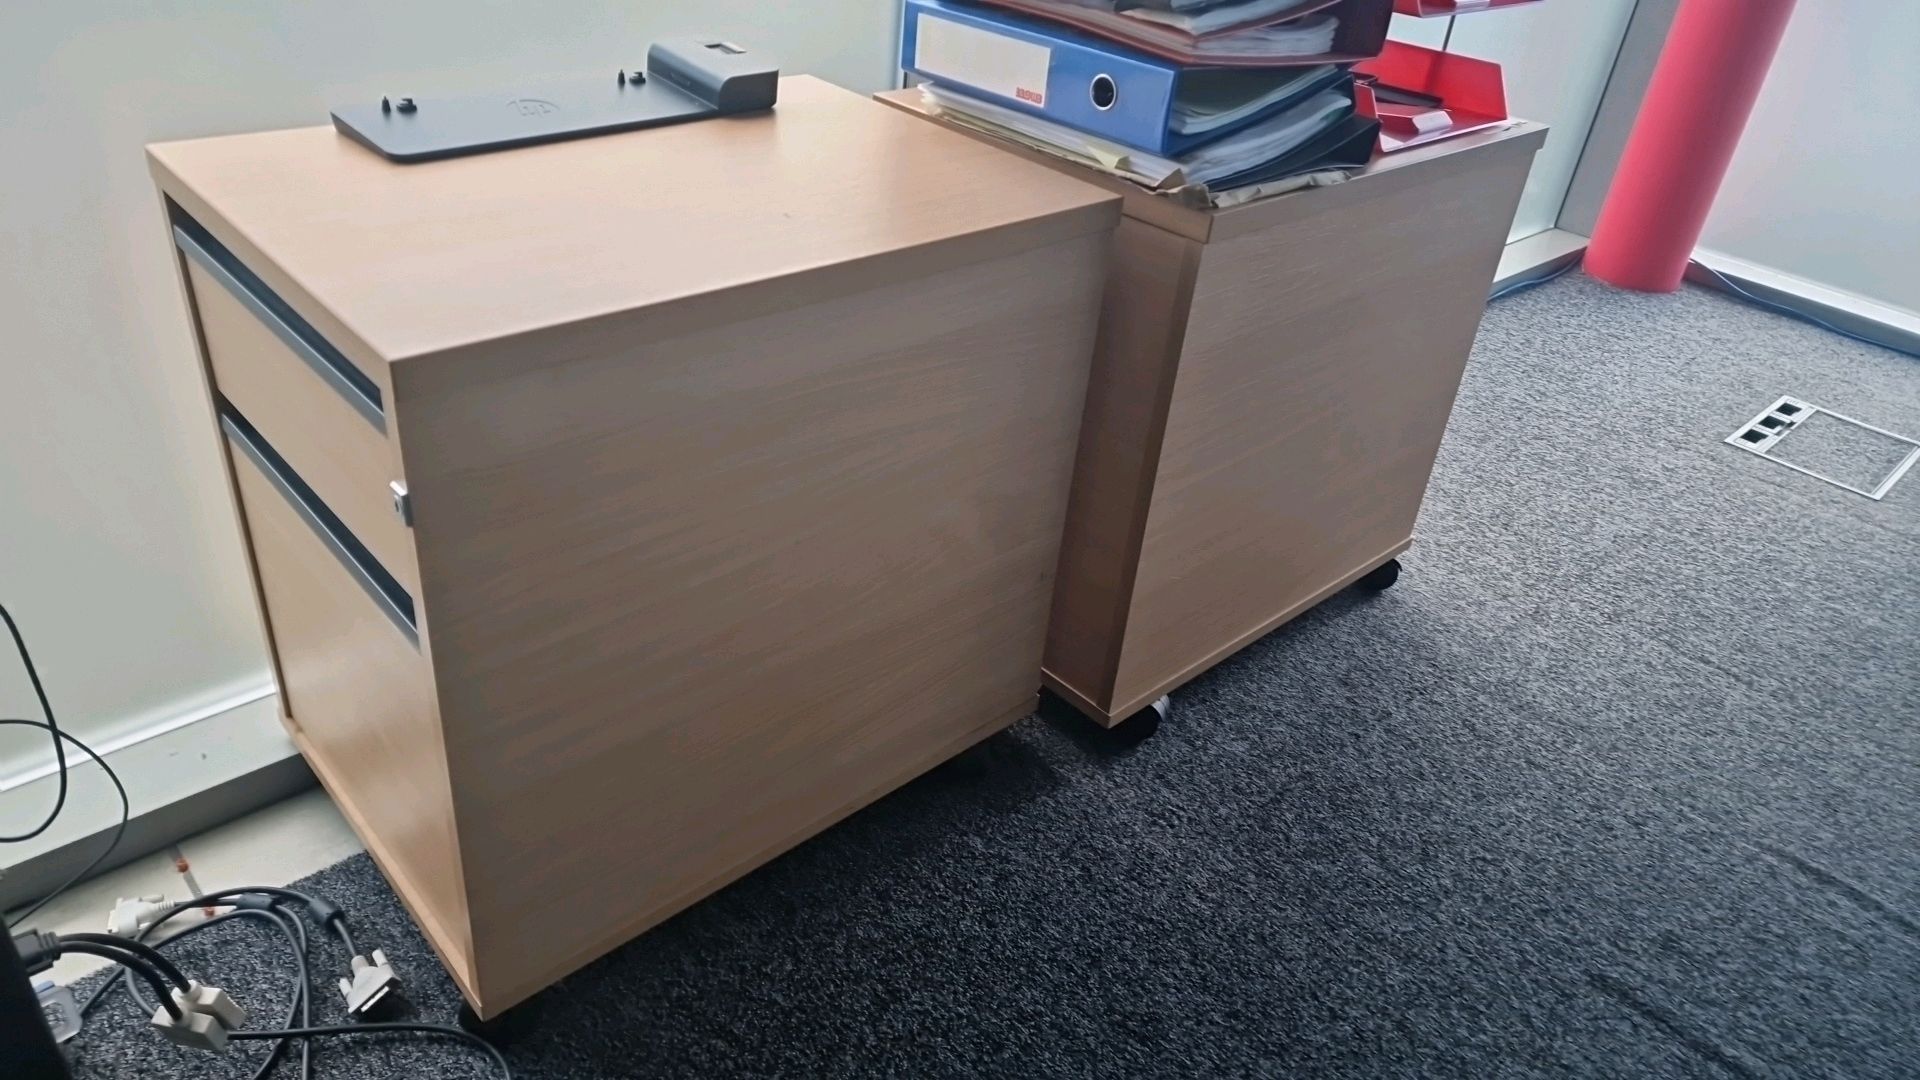 ref 56 - Office Drawer Units x5 - Image 3 of 5